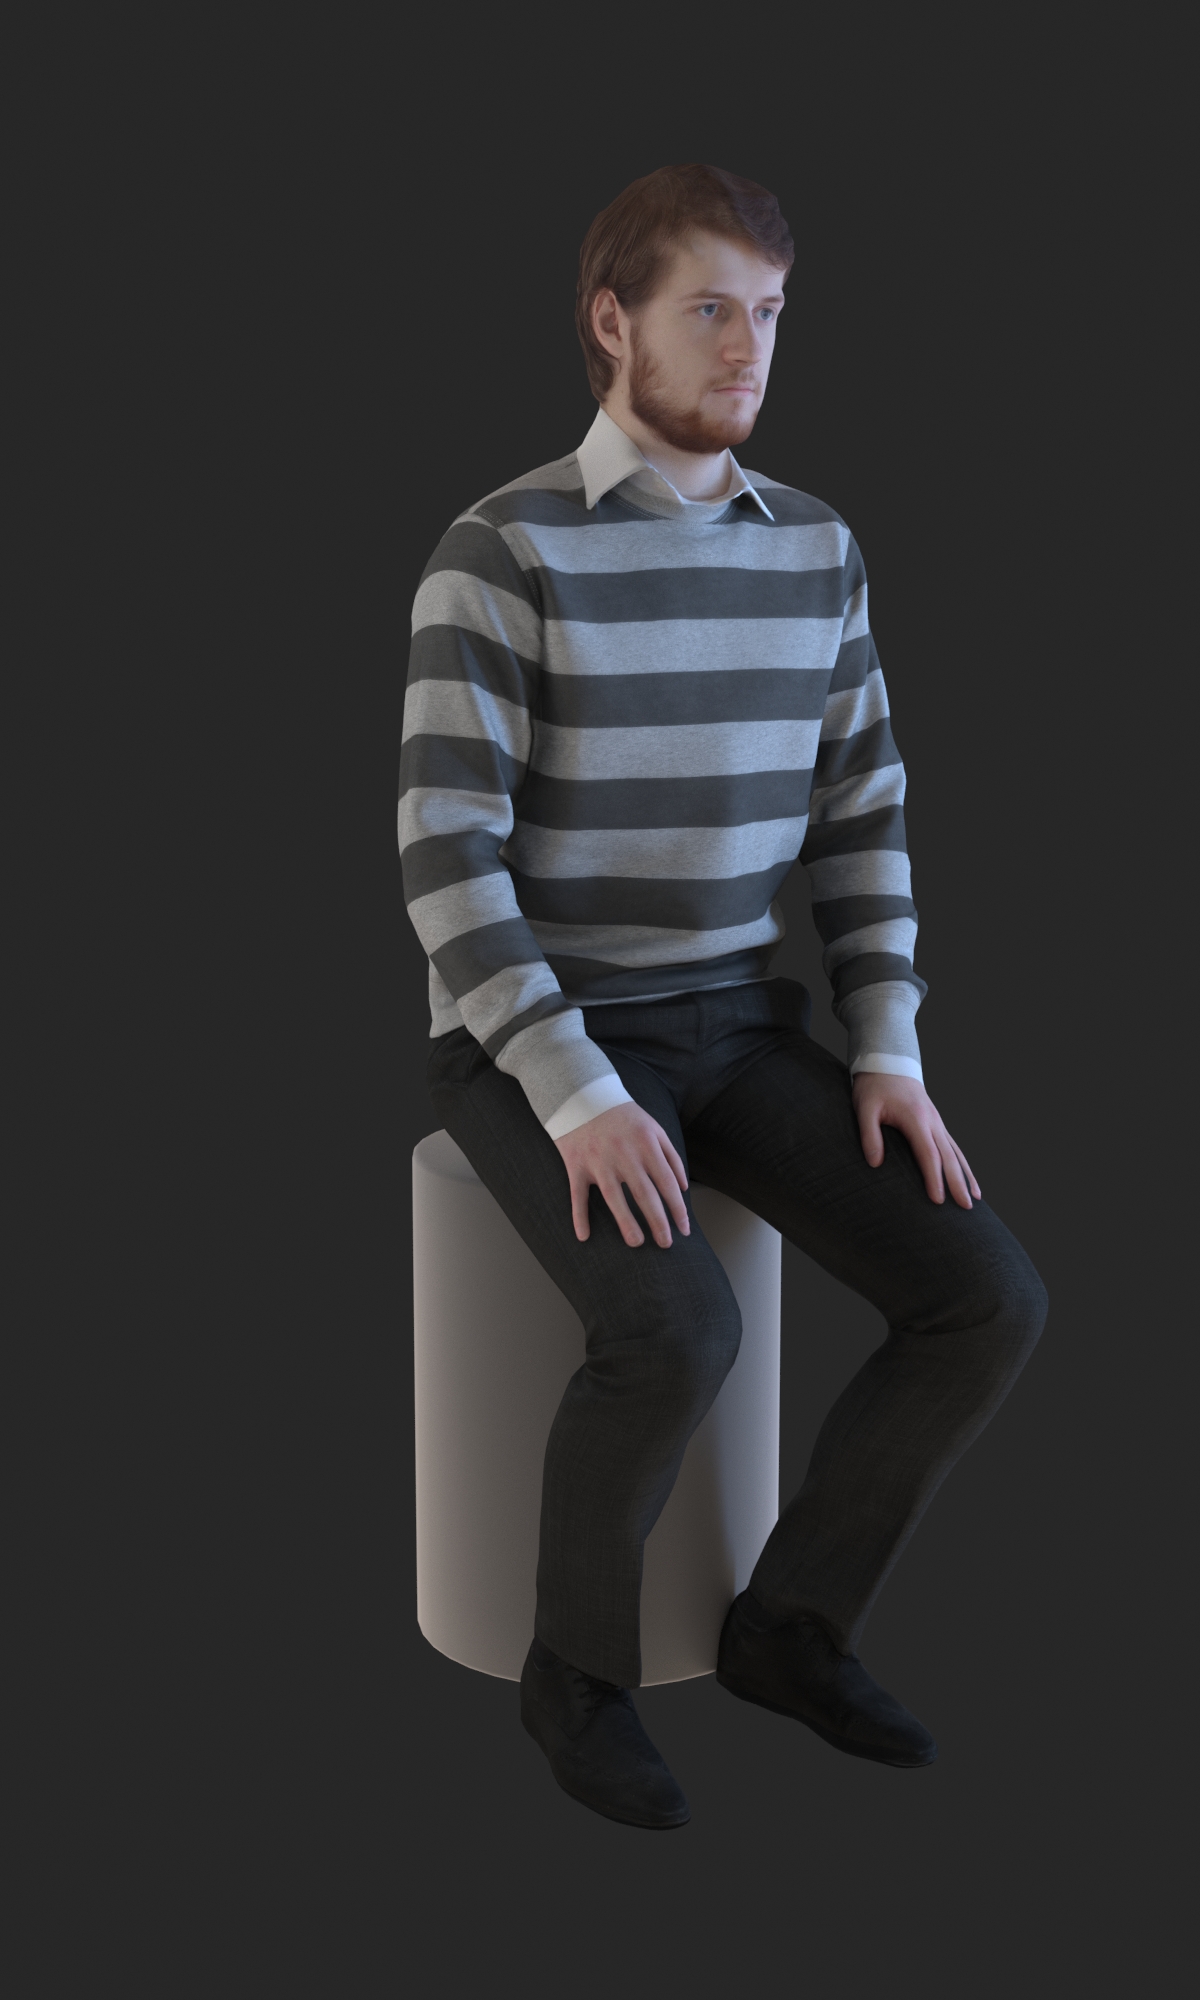 3DSKY FREE – HUMAN 3D – POSED PEOPLE – No.005